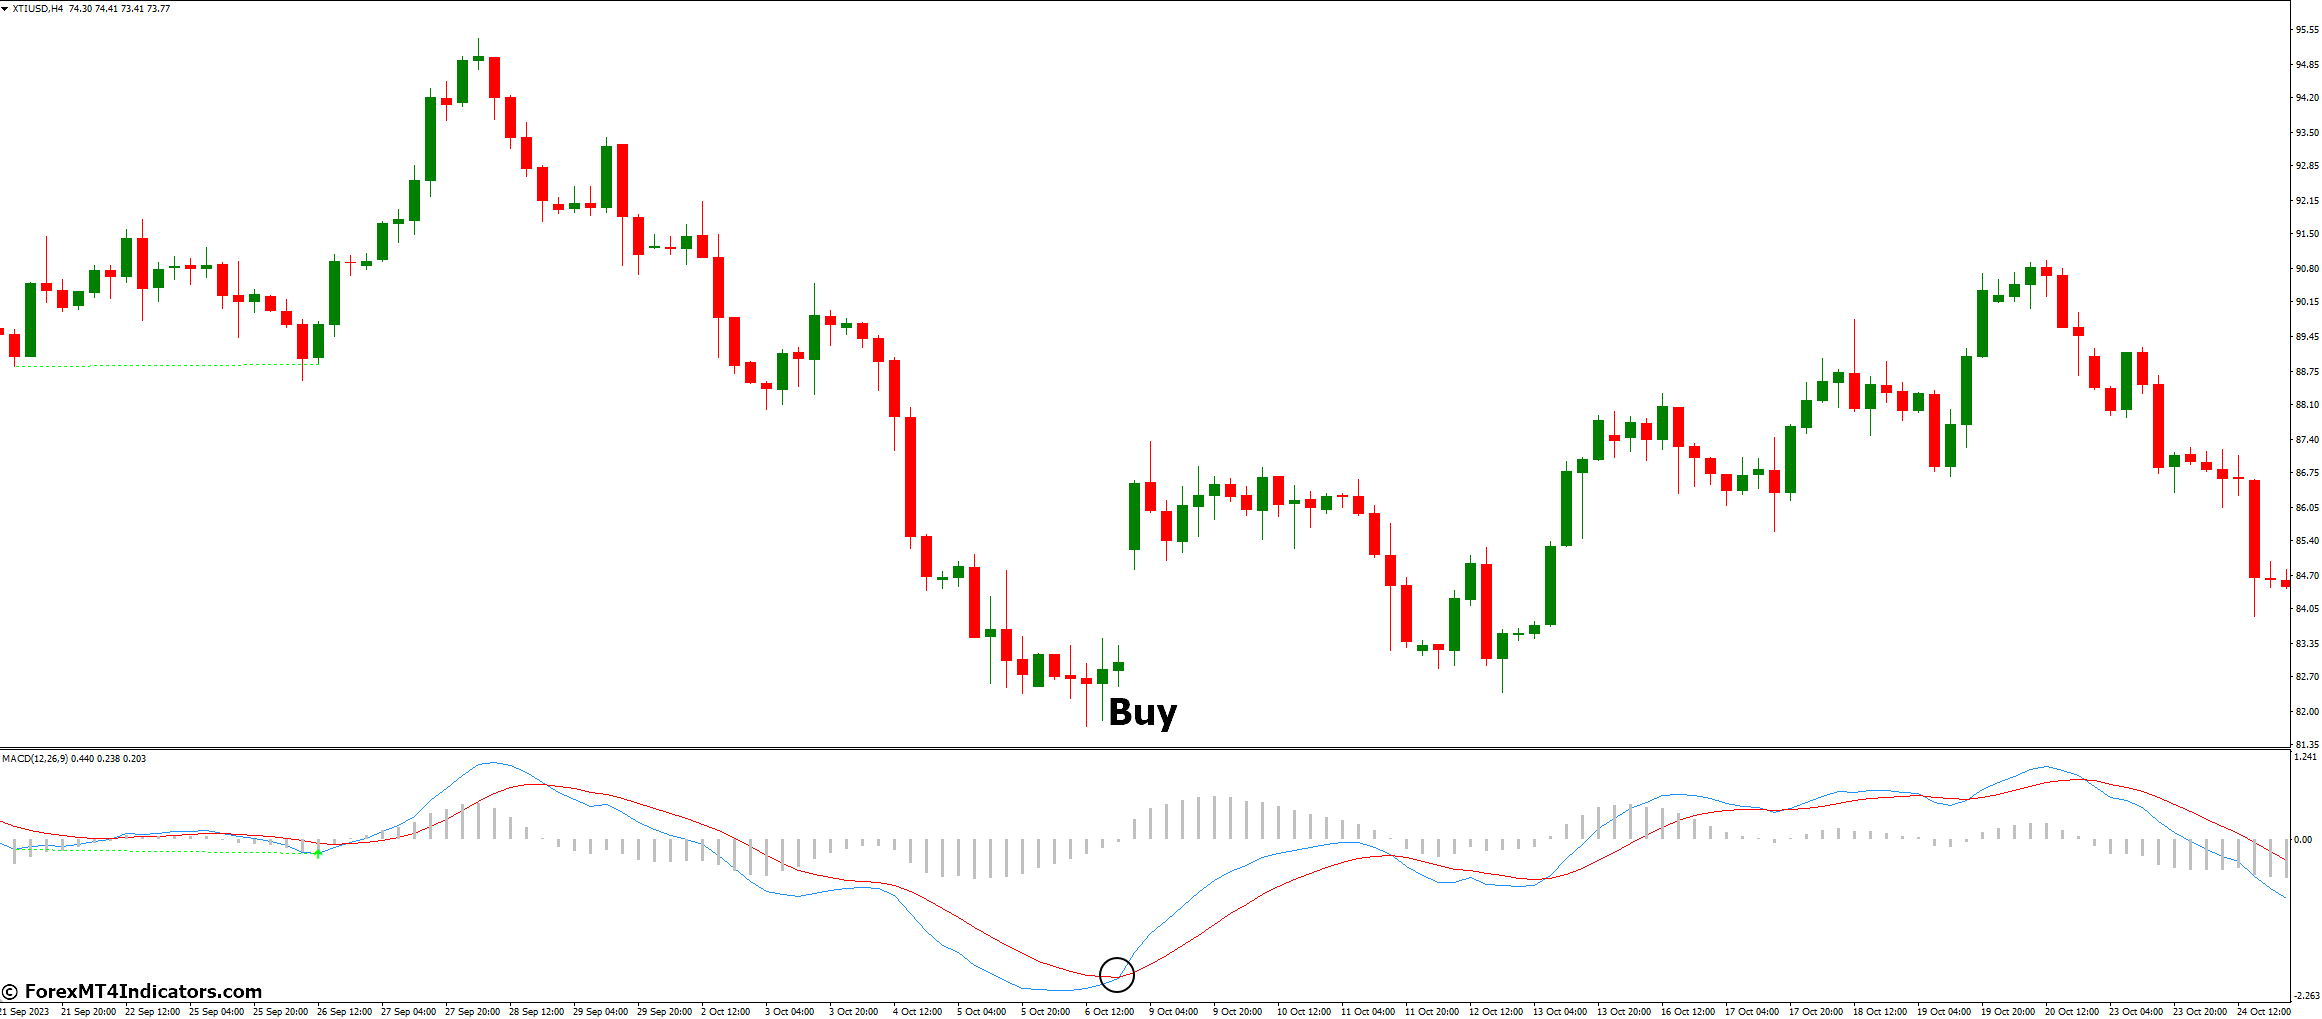 How to Trade with MACD Histogram Indicator - Buy Entry